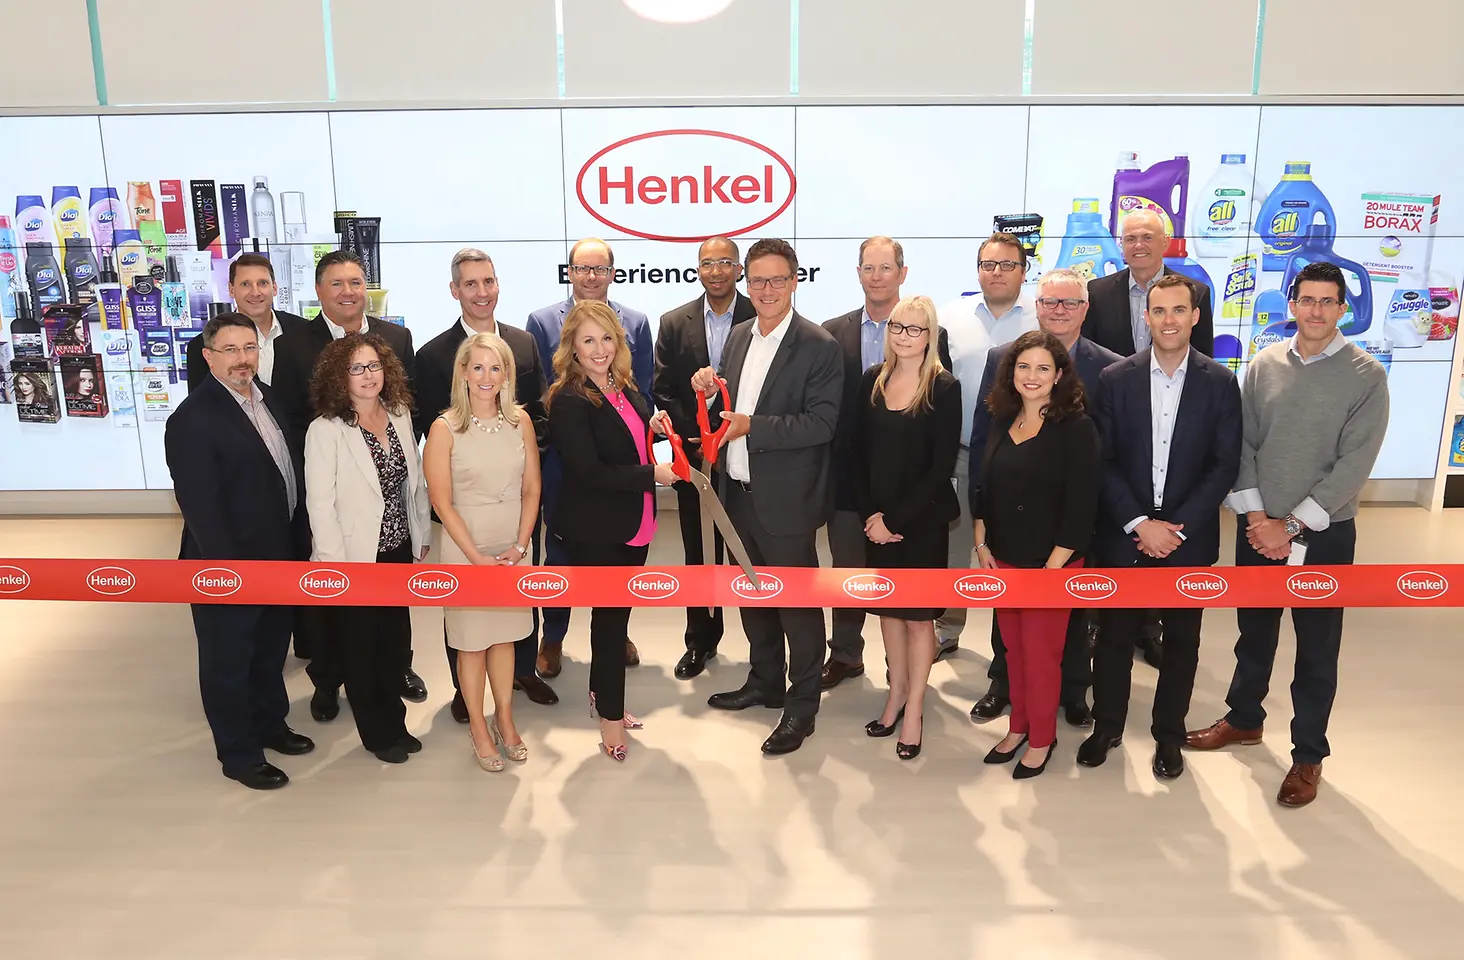 Leaders from Henkel North America celebrate the opening of the Henkel Experience Center in Stamford, CT.